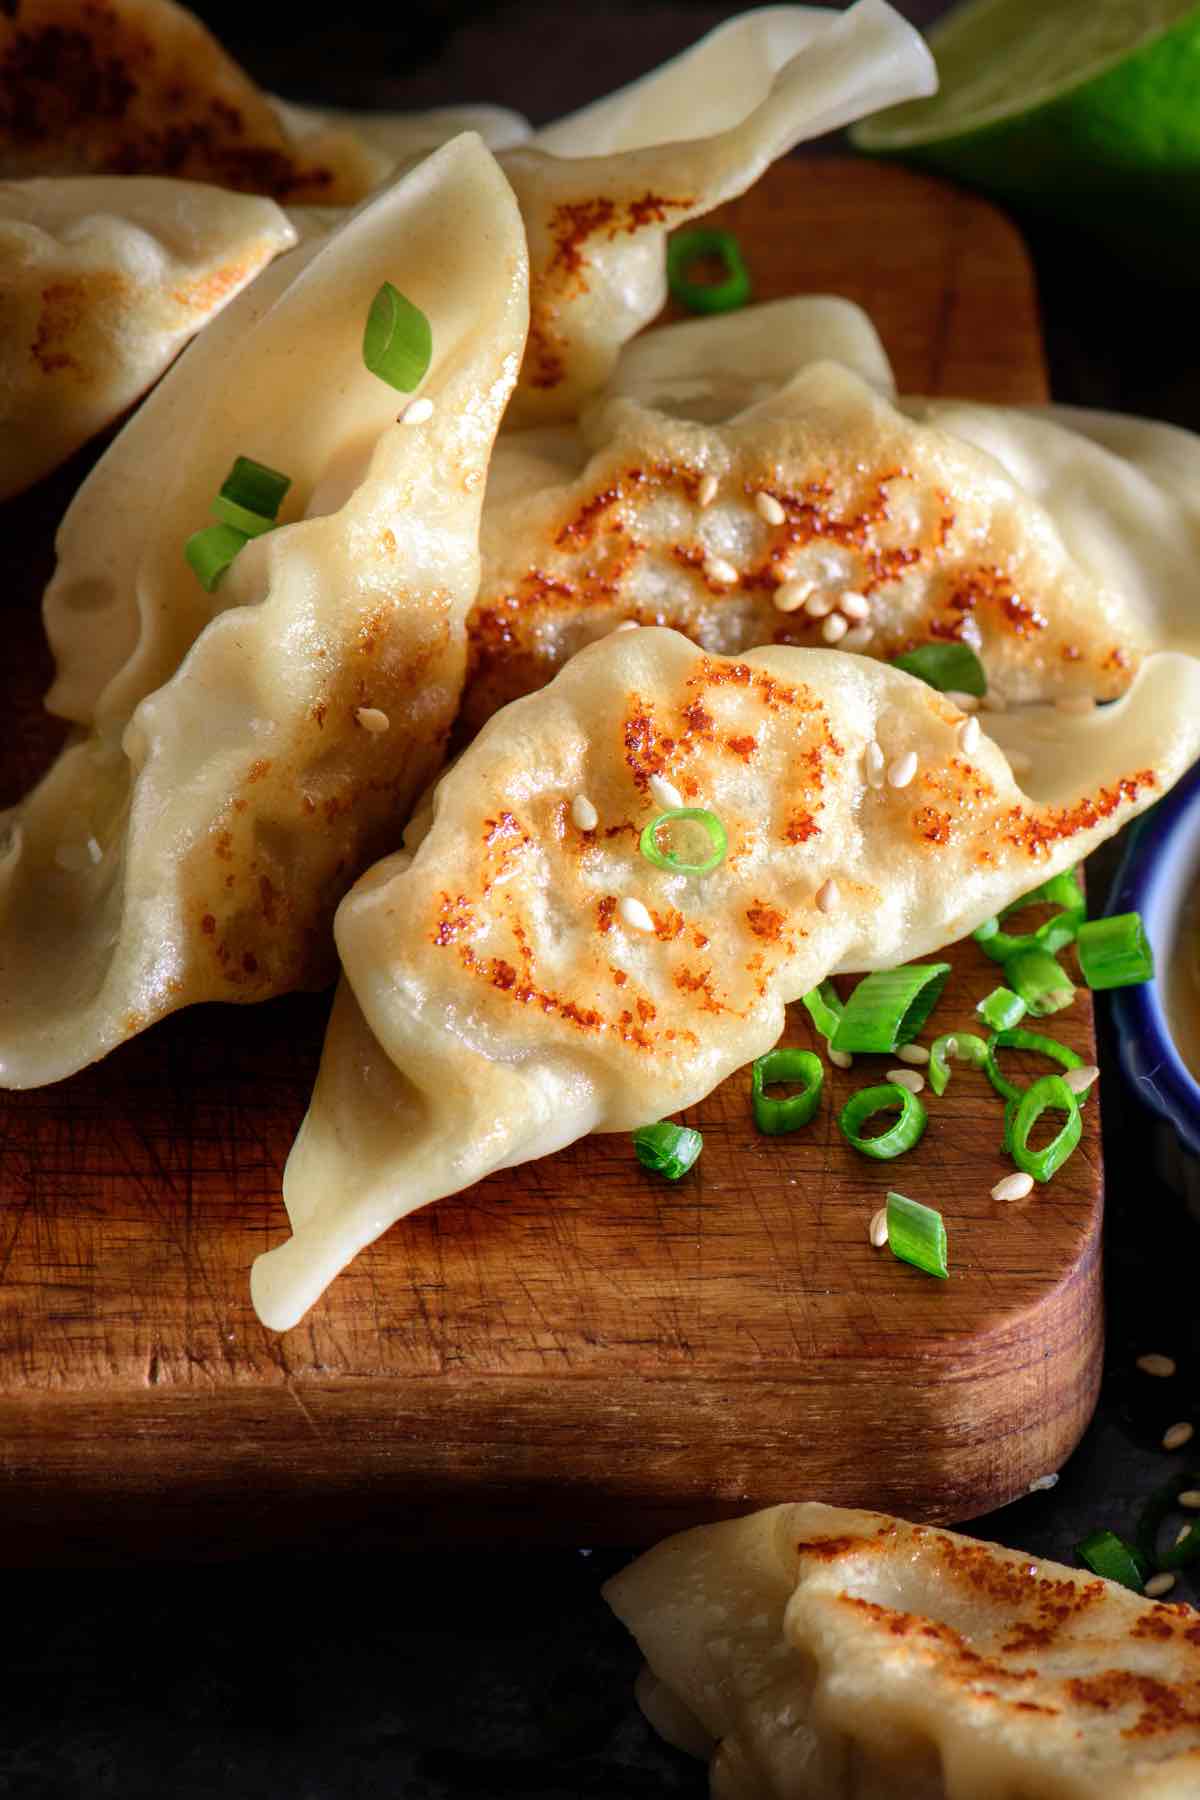 Peking Ravioli or pan-fried dumplings are a delicious cross between Asian and American cuisine. These irresistible potstickers are nothing like the Italian pasta dish that shares its name. It was called ‘ravioli’ as a clever marketing trick to attract Italian-American customers.